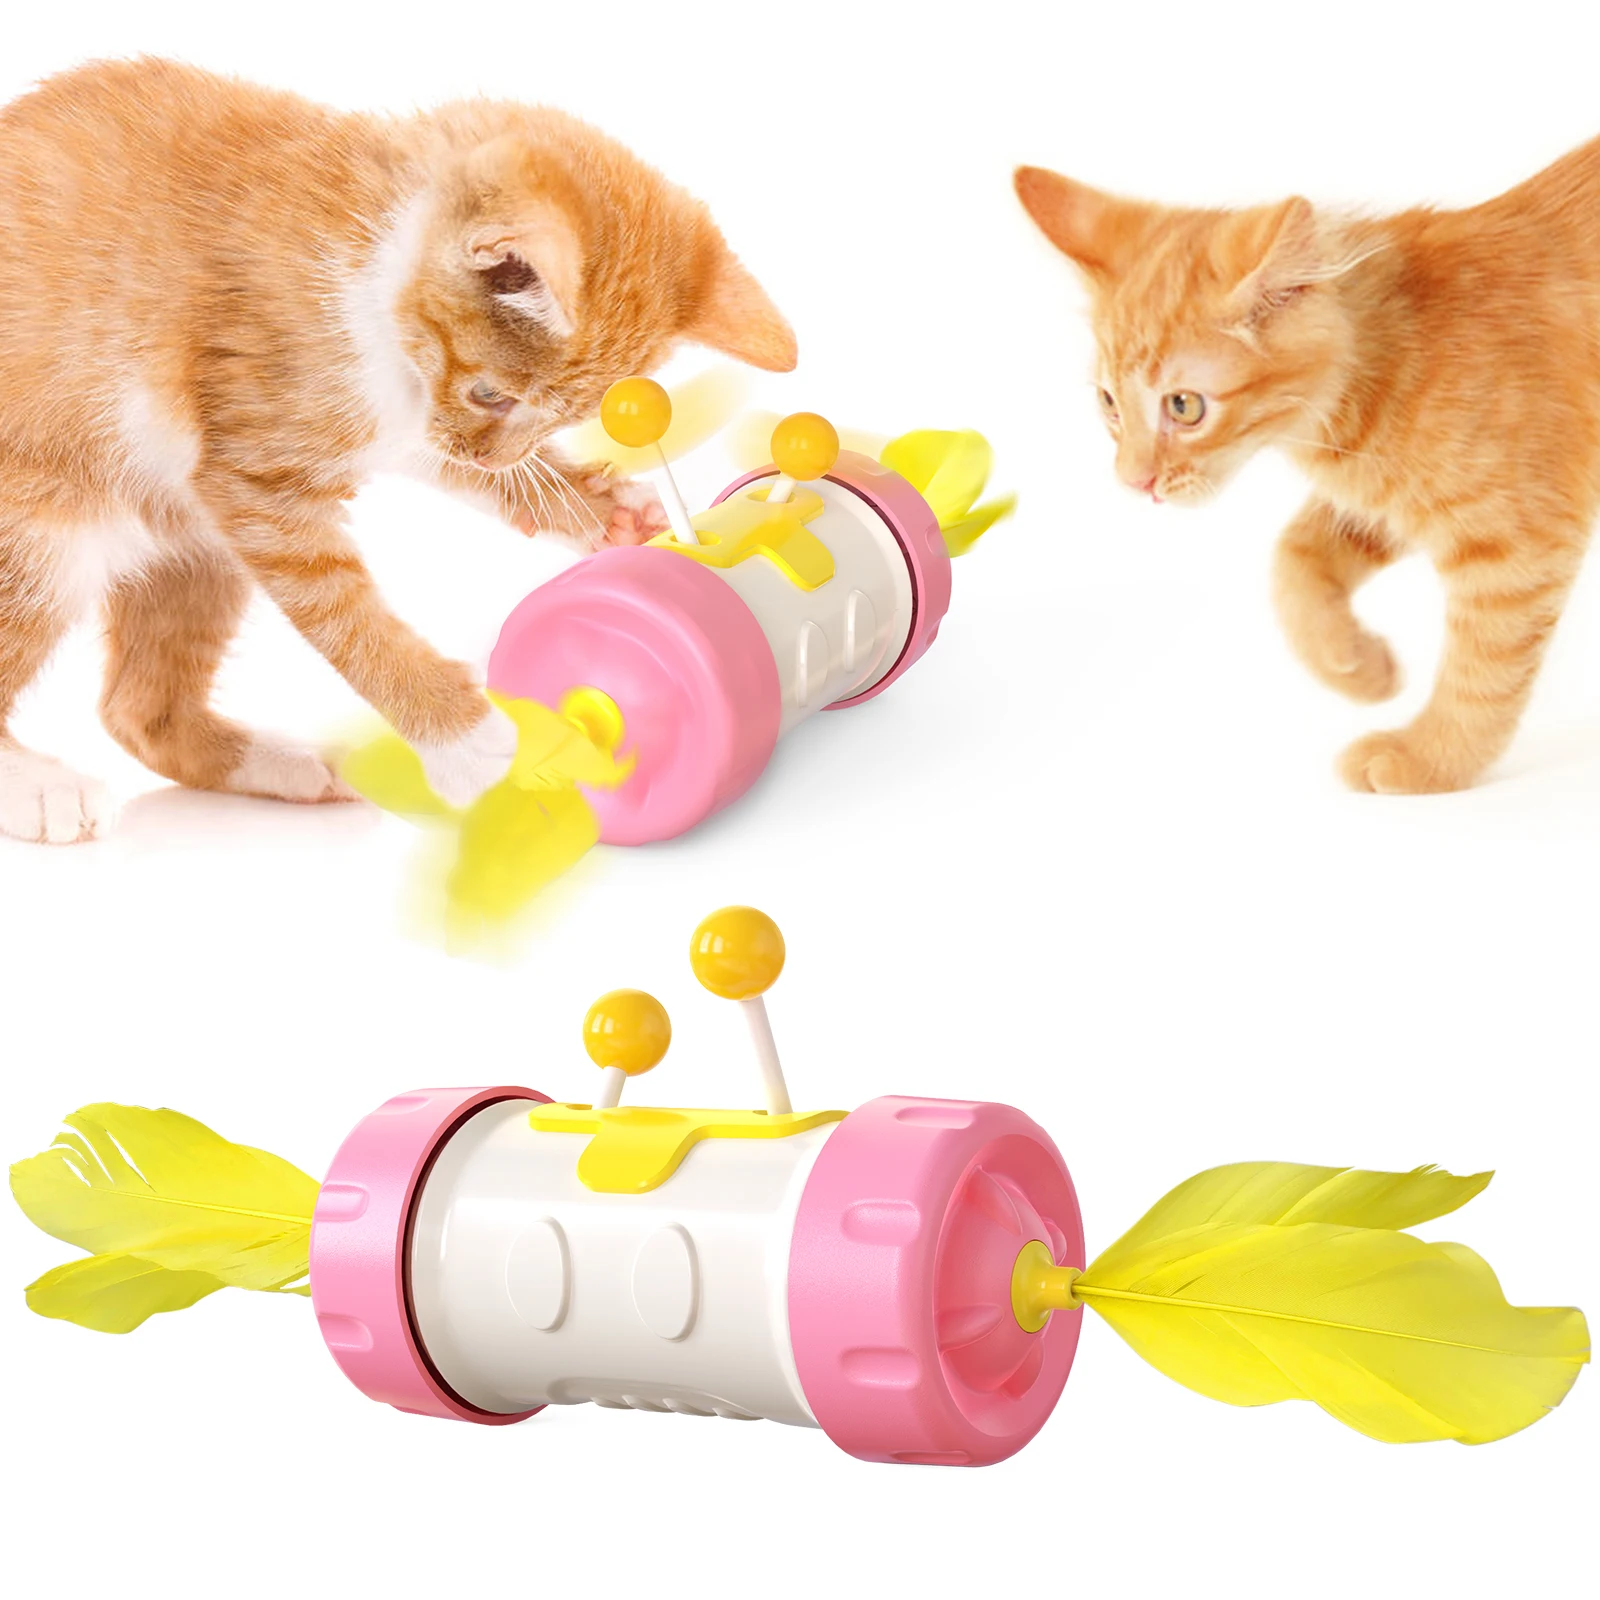 

Professional Manufacture Cheap 2021 Hot Tumbler Feather Funny Cat Baseball Cat Toy Funny Cat Stick Tumbler, American blue, pink, yellow, lake blue, green